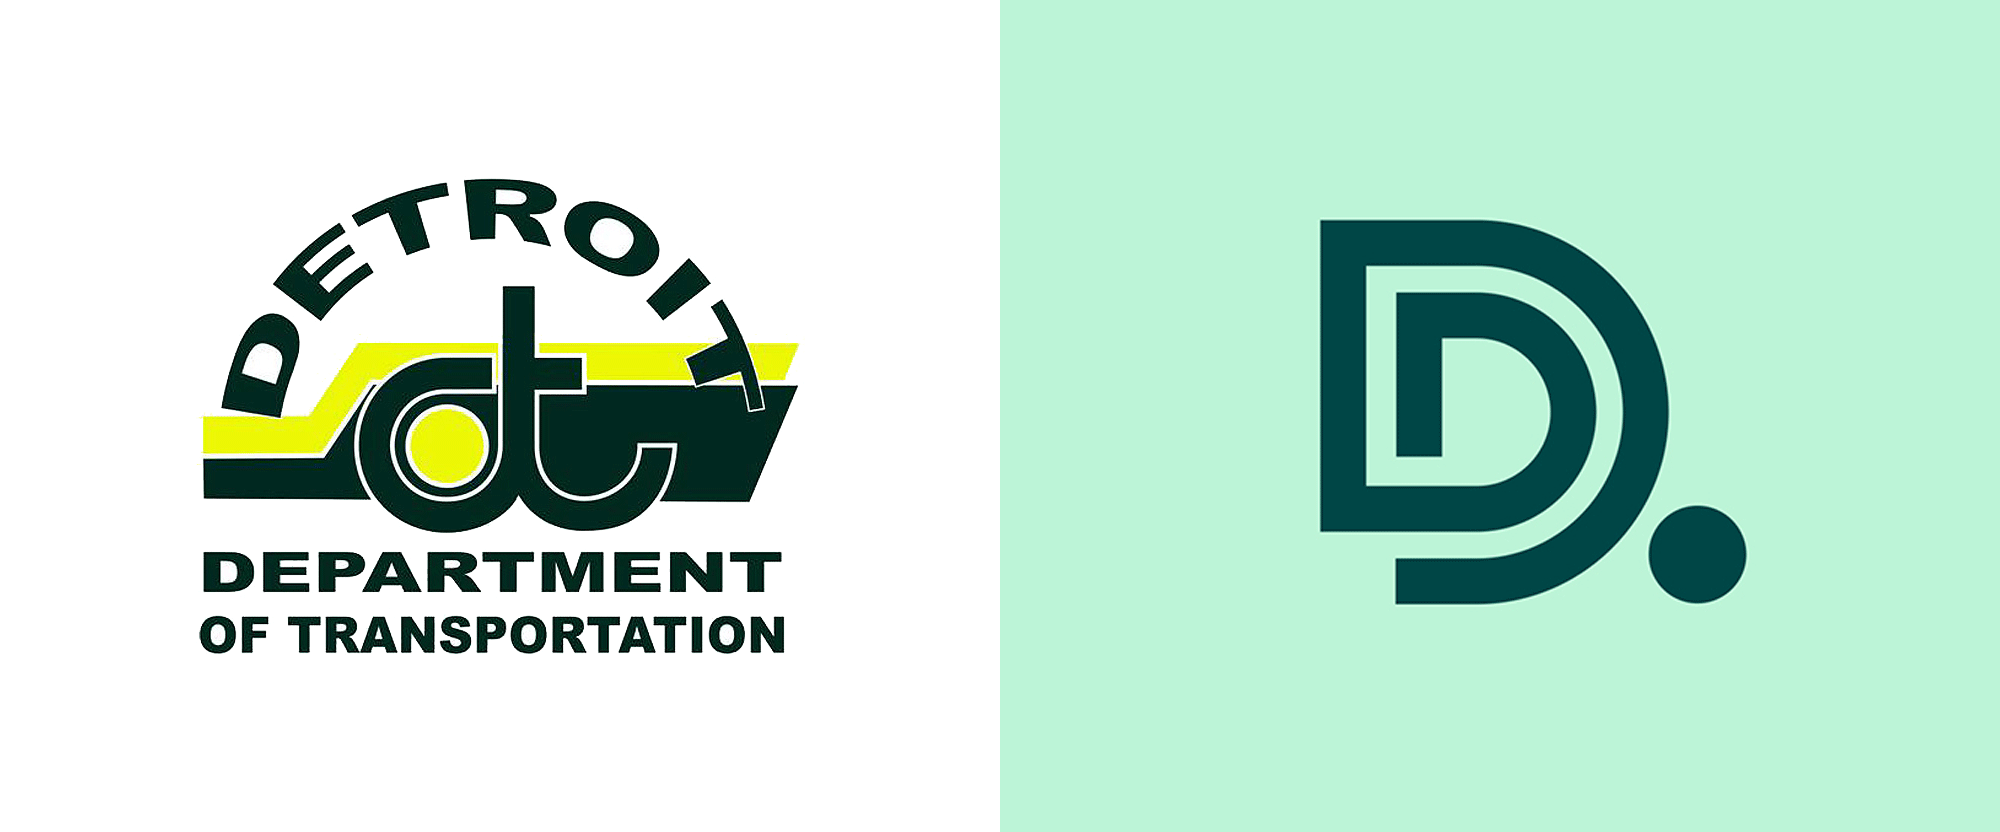 Detroit Logo - Brand New: New Logo and Identity for Detroit Department of ...